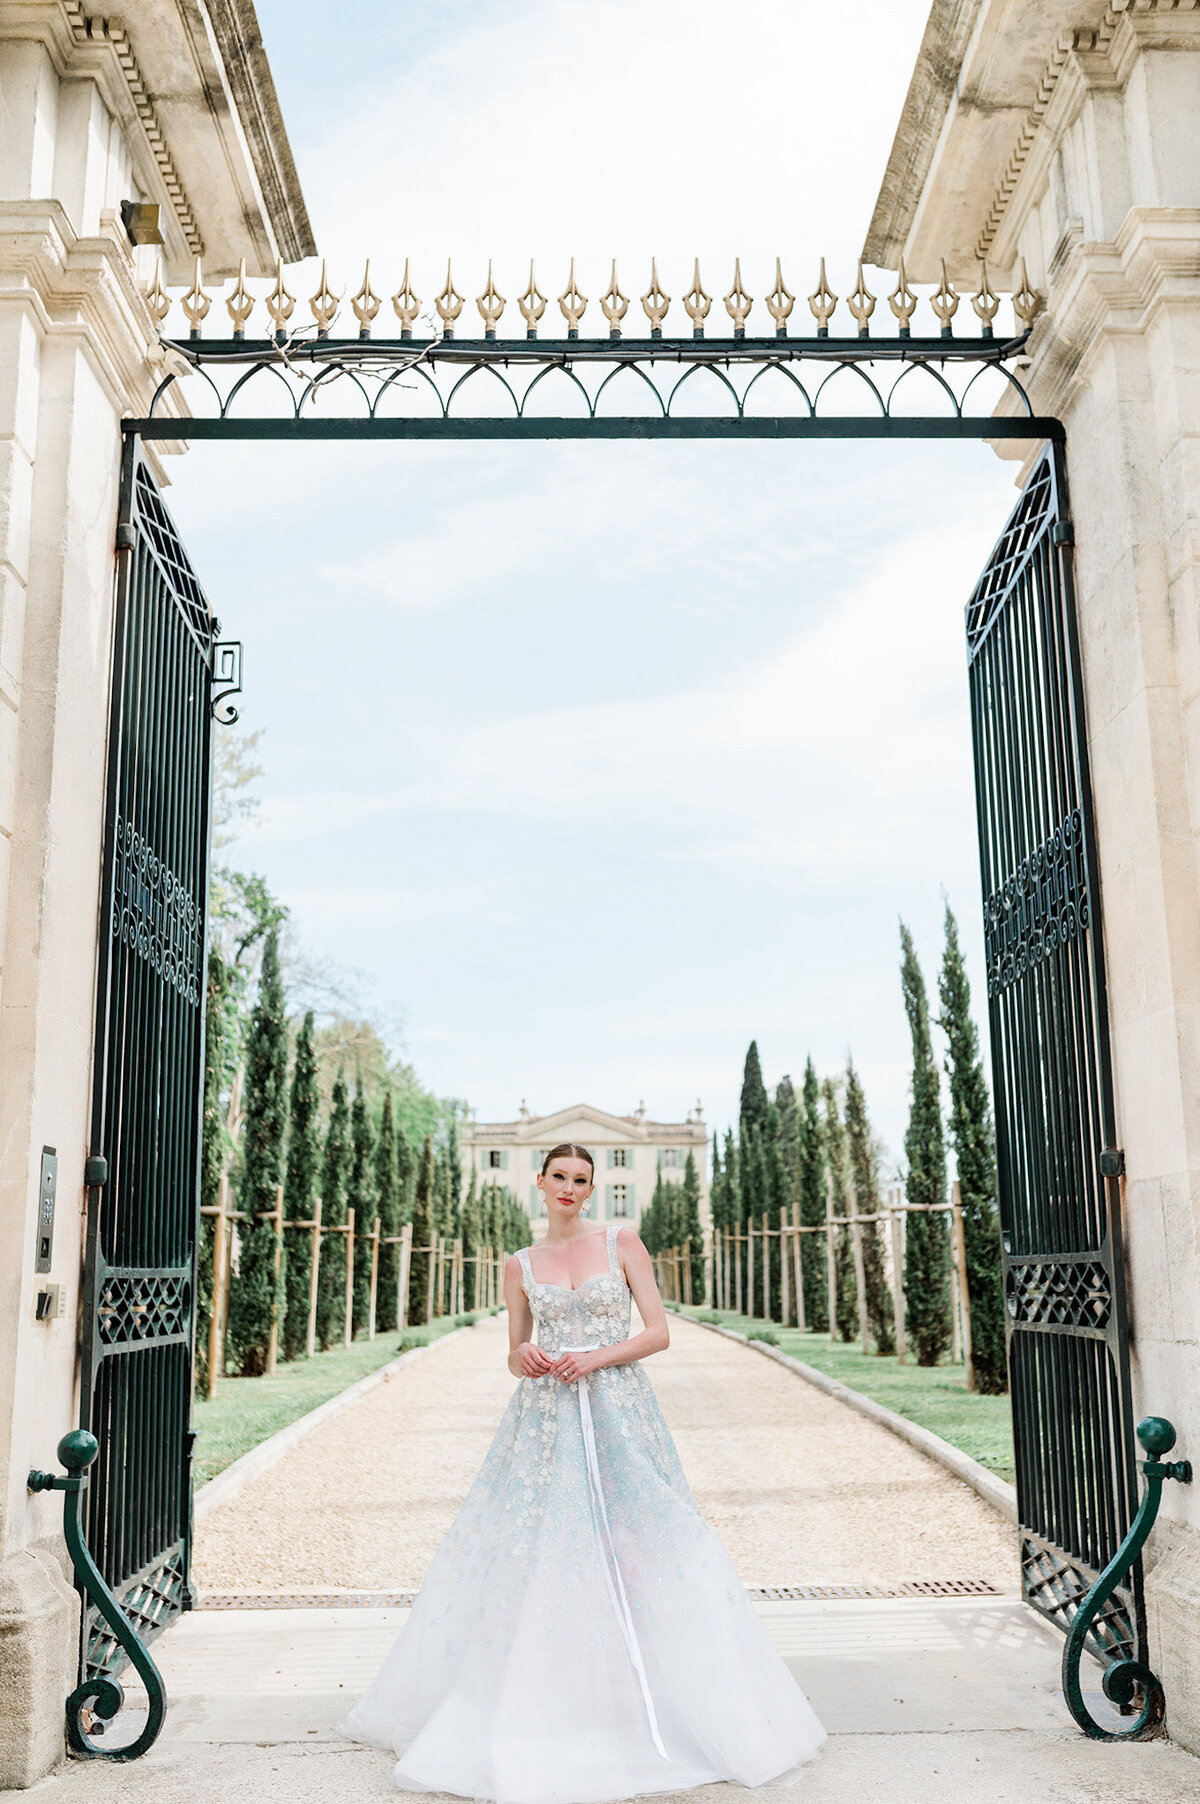 Cherish the intimate moments of your wedding celebration in the South of France with our luxury services. Our fine art lens transforms your journey into a visual story, capturing the delicate details and emotions that define your connection, against the backdrop of Château de Tourreau's splendor.